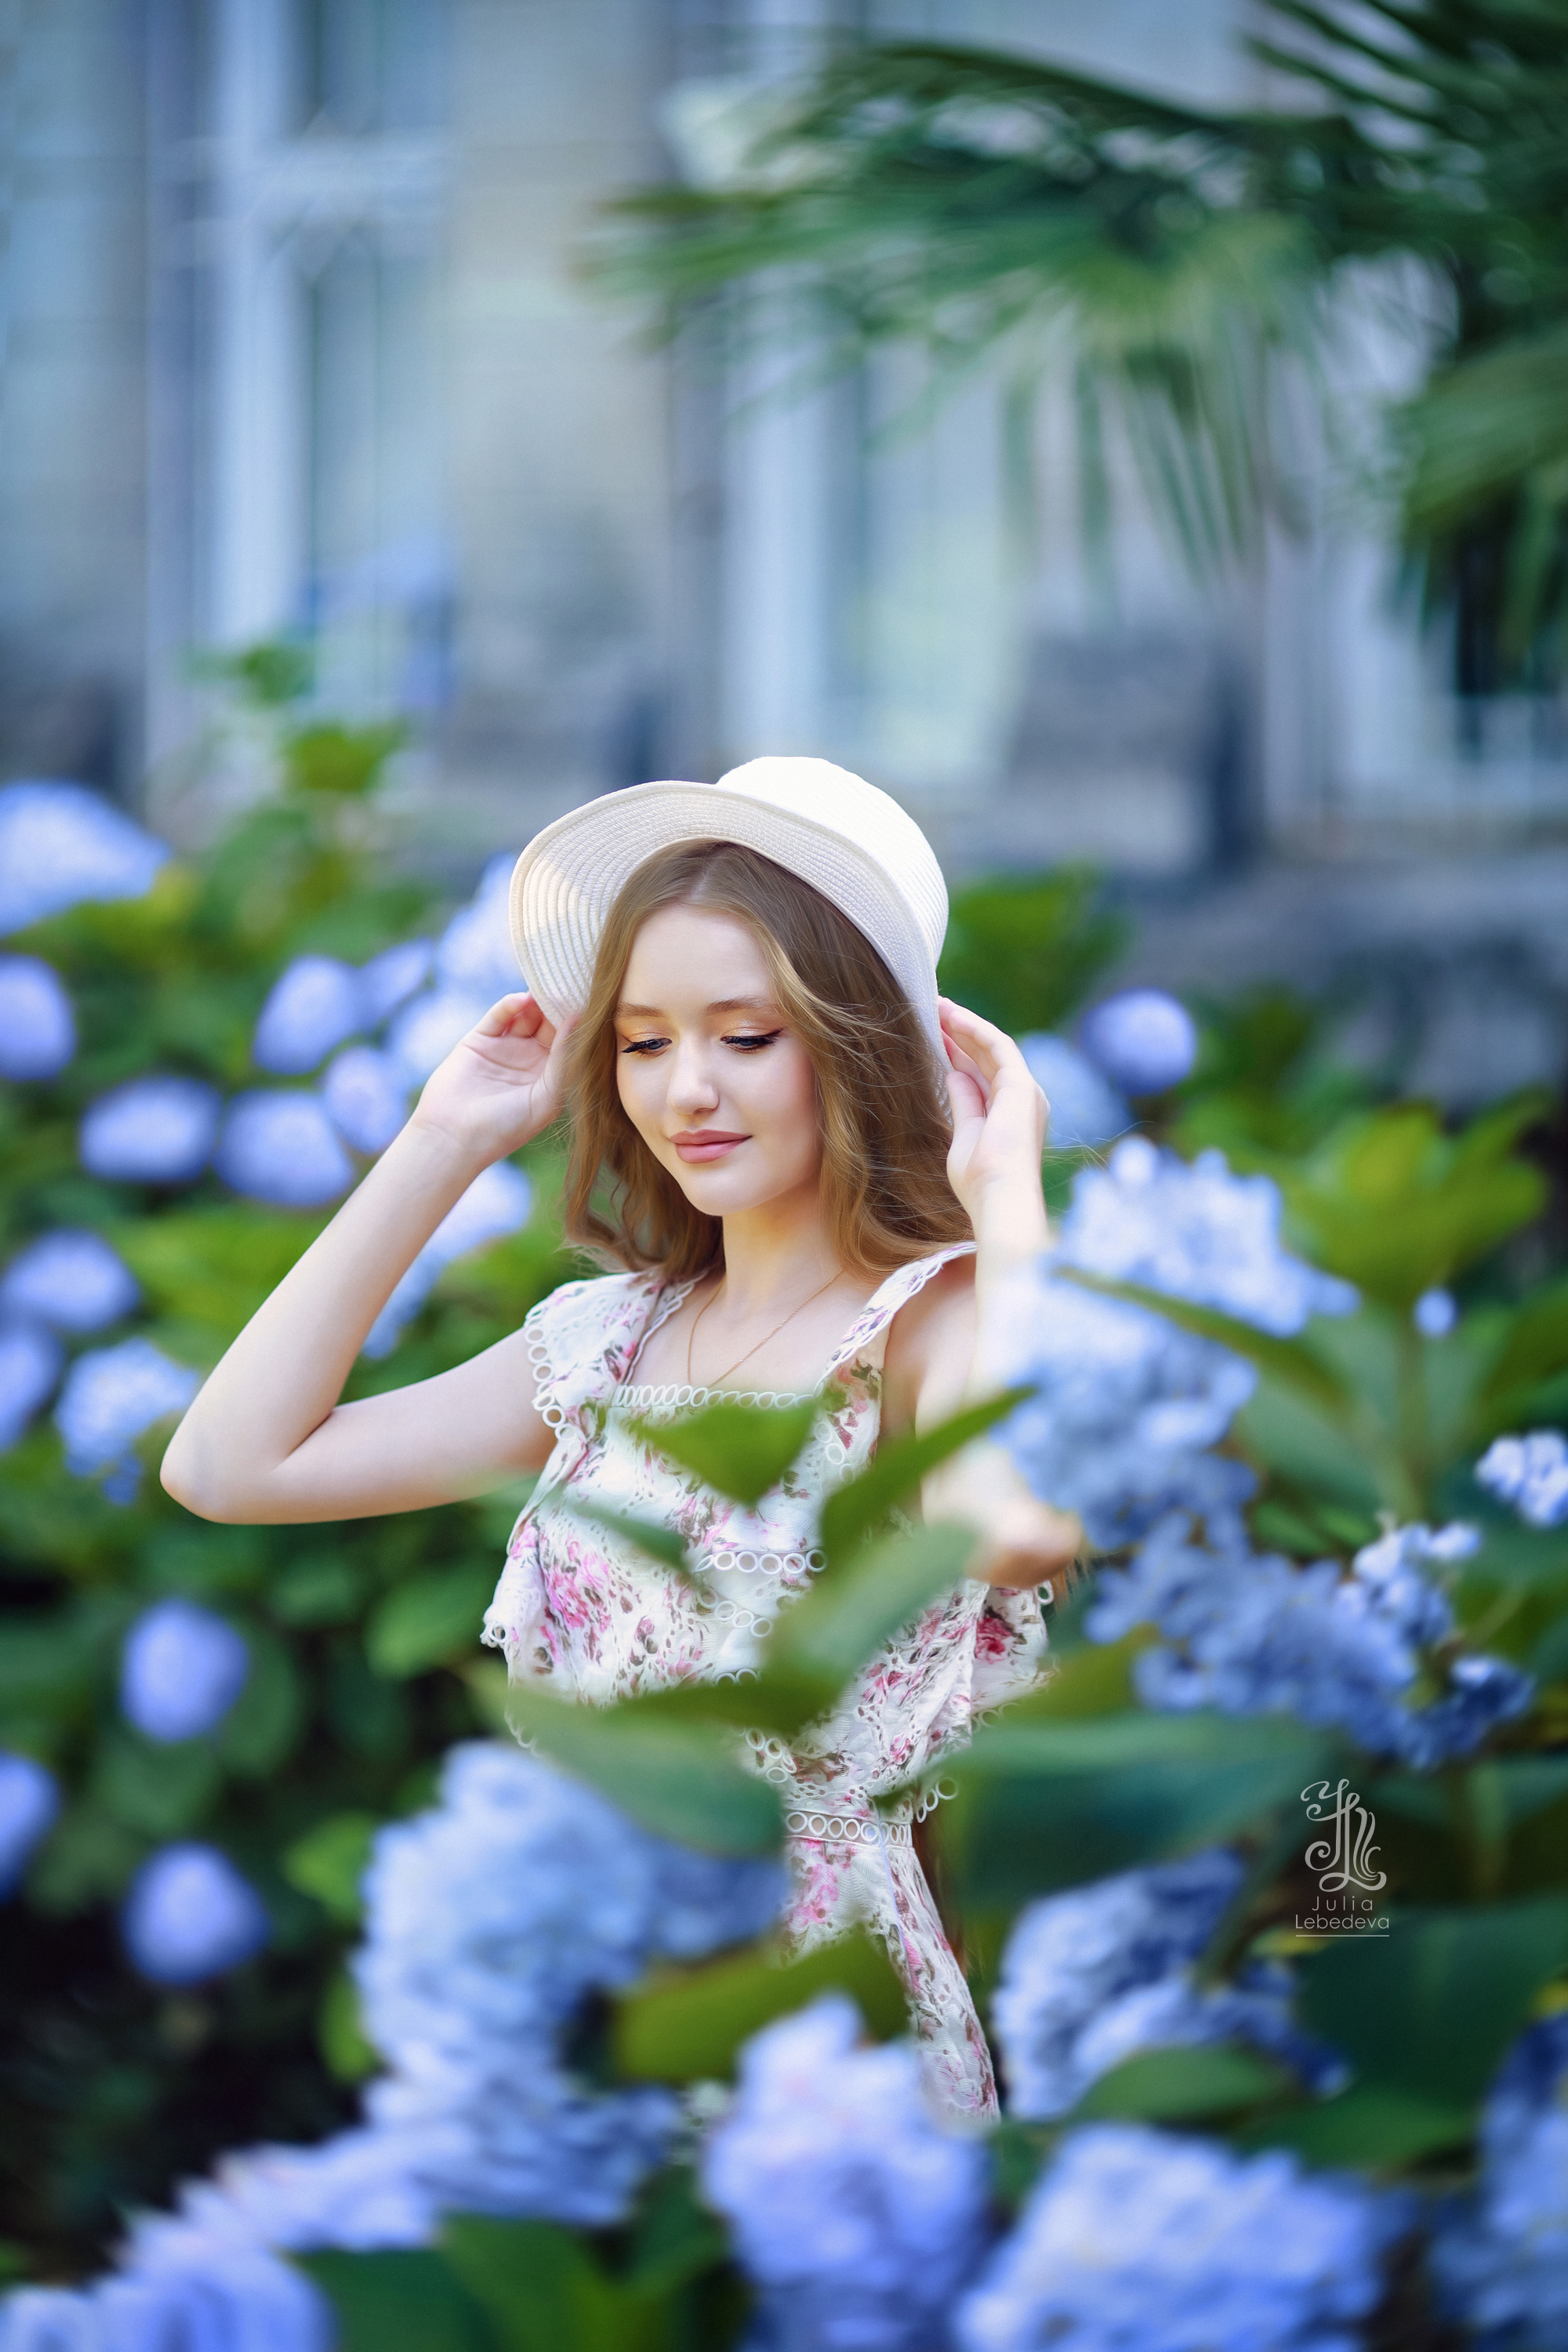 horizontal, photography, outdoors, nature, youngwomen, oneperson, beautifulwoman, flower, beauty, portrait, fashion, lifestyles, day, dress, hat, flowers, Лебедева Юлия